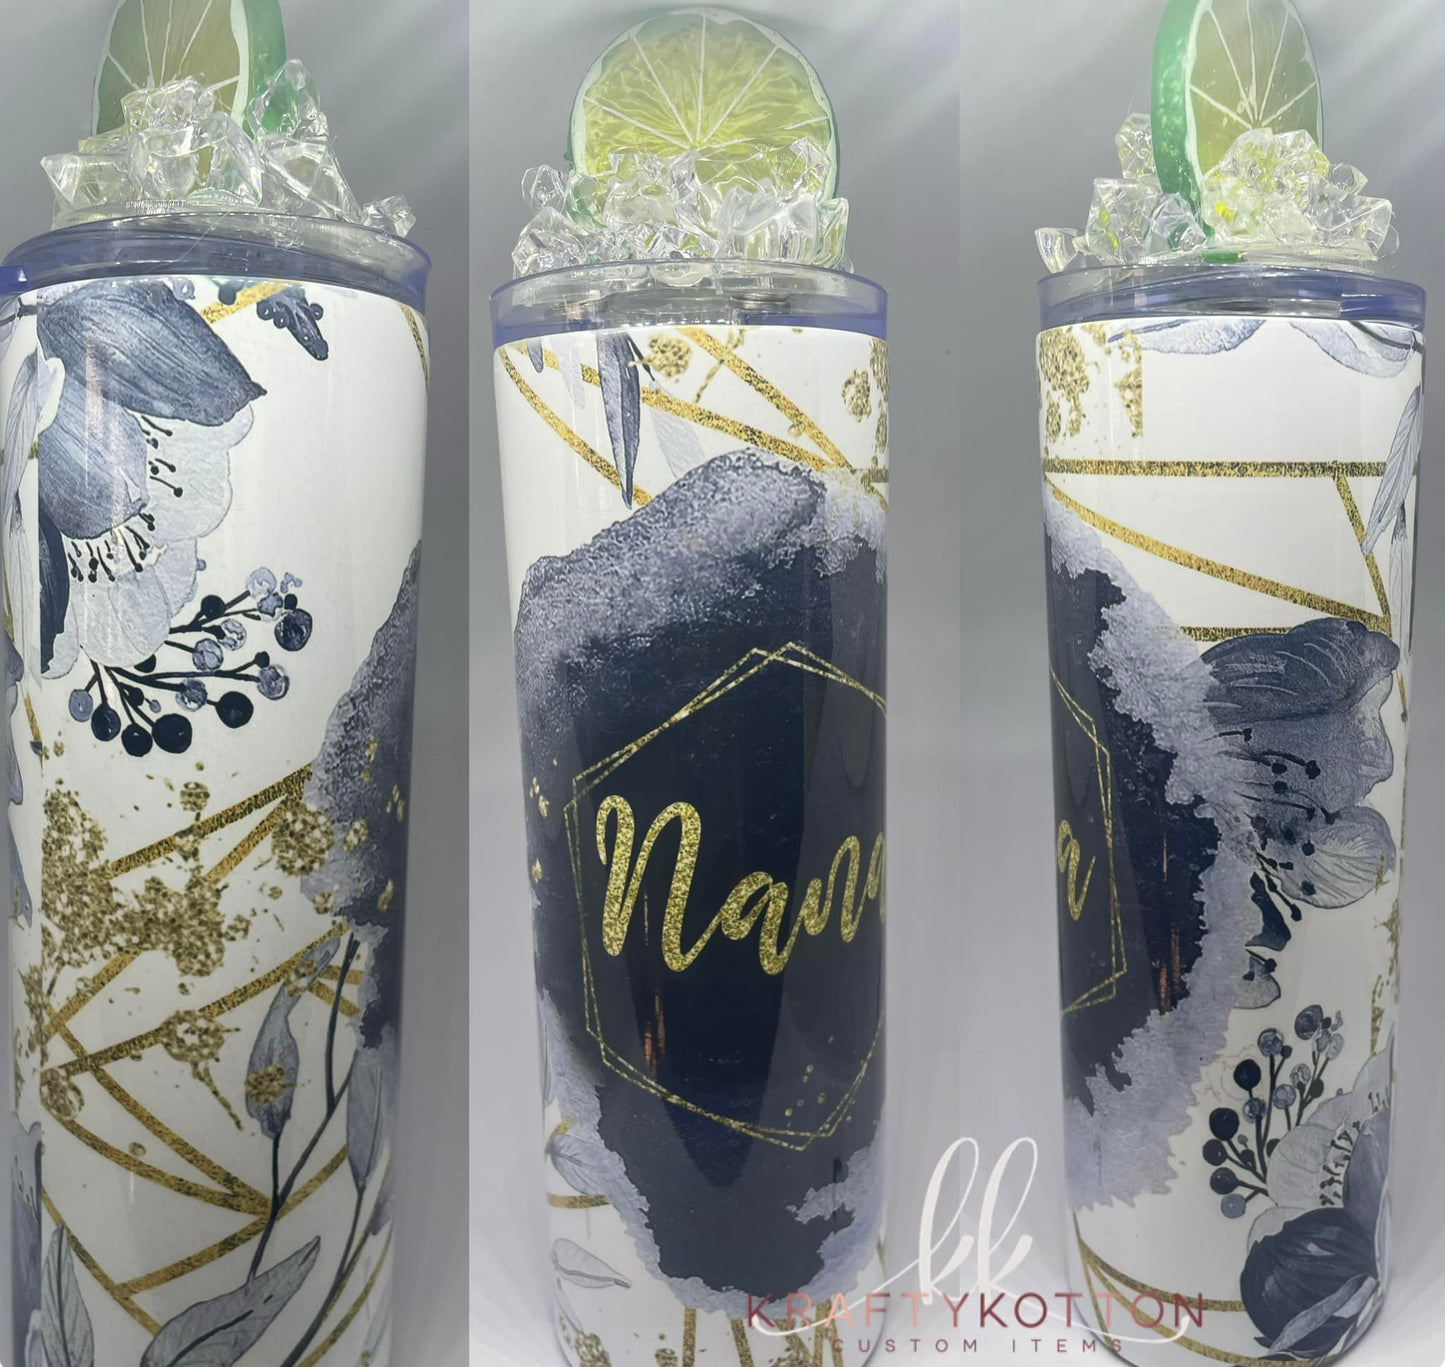 Customized Sublimation Tumbler or Glass Can